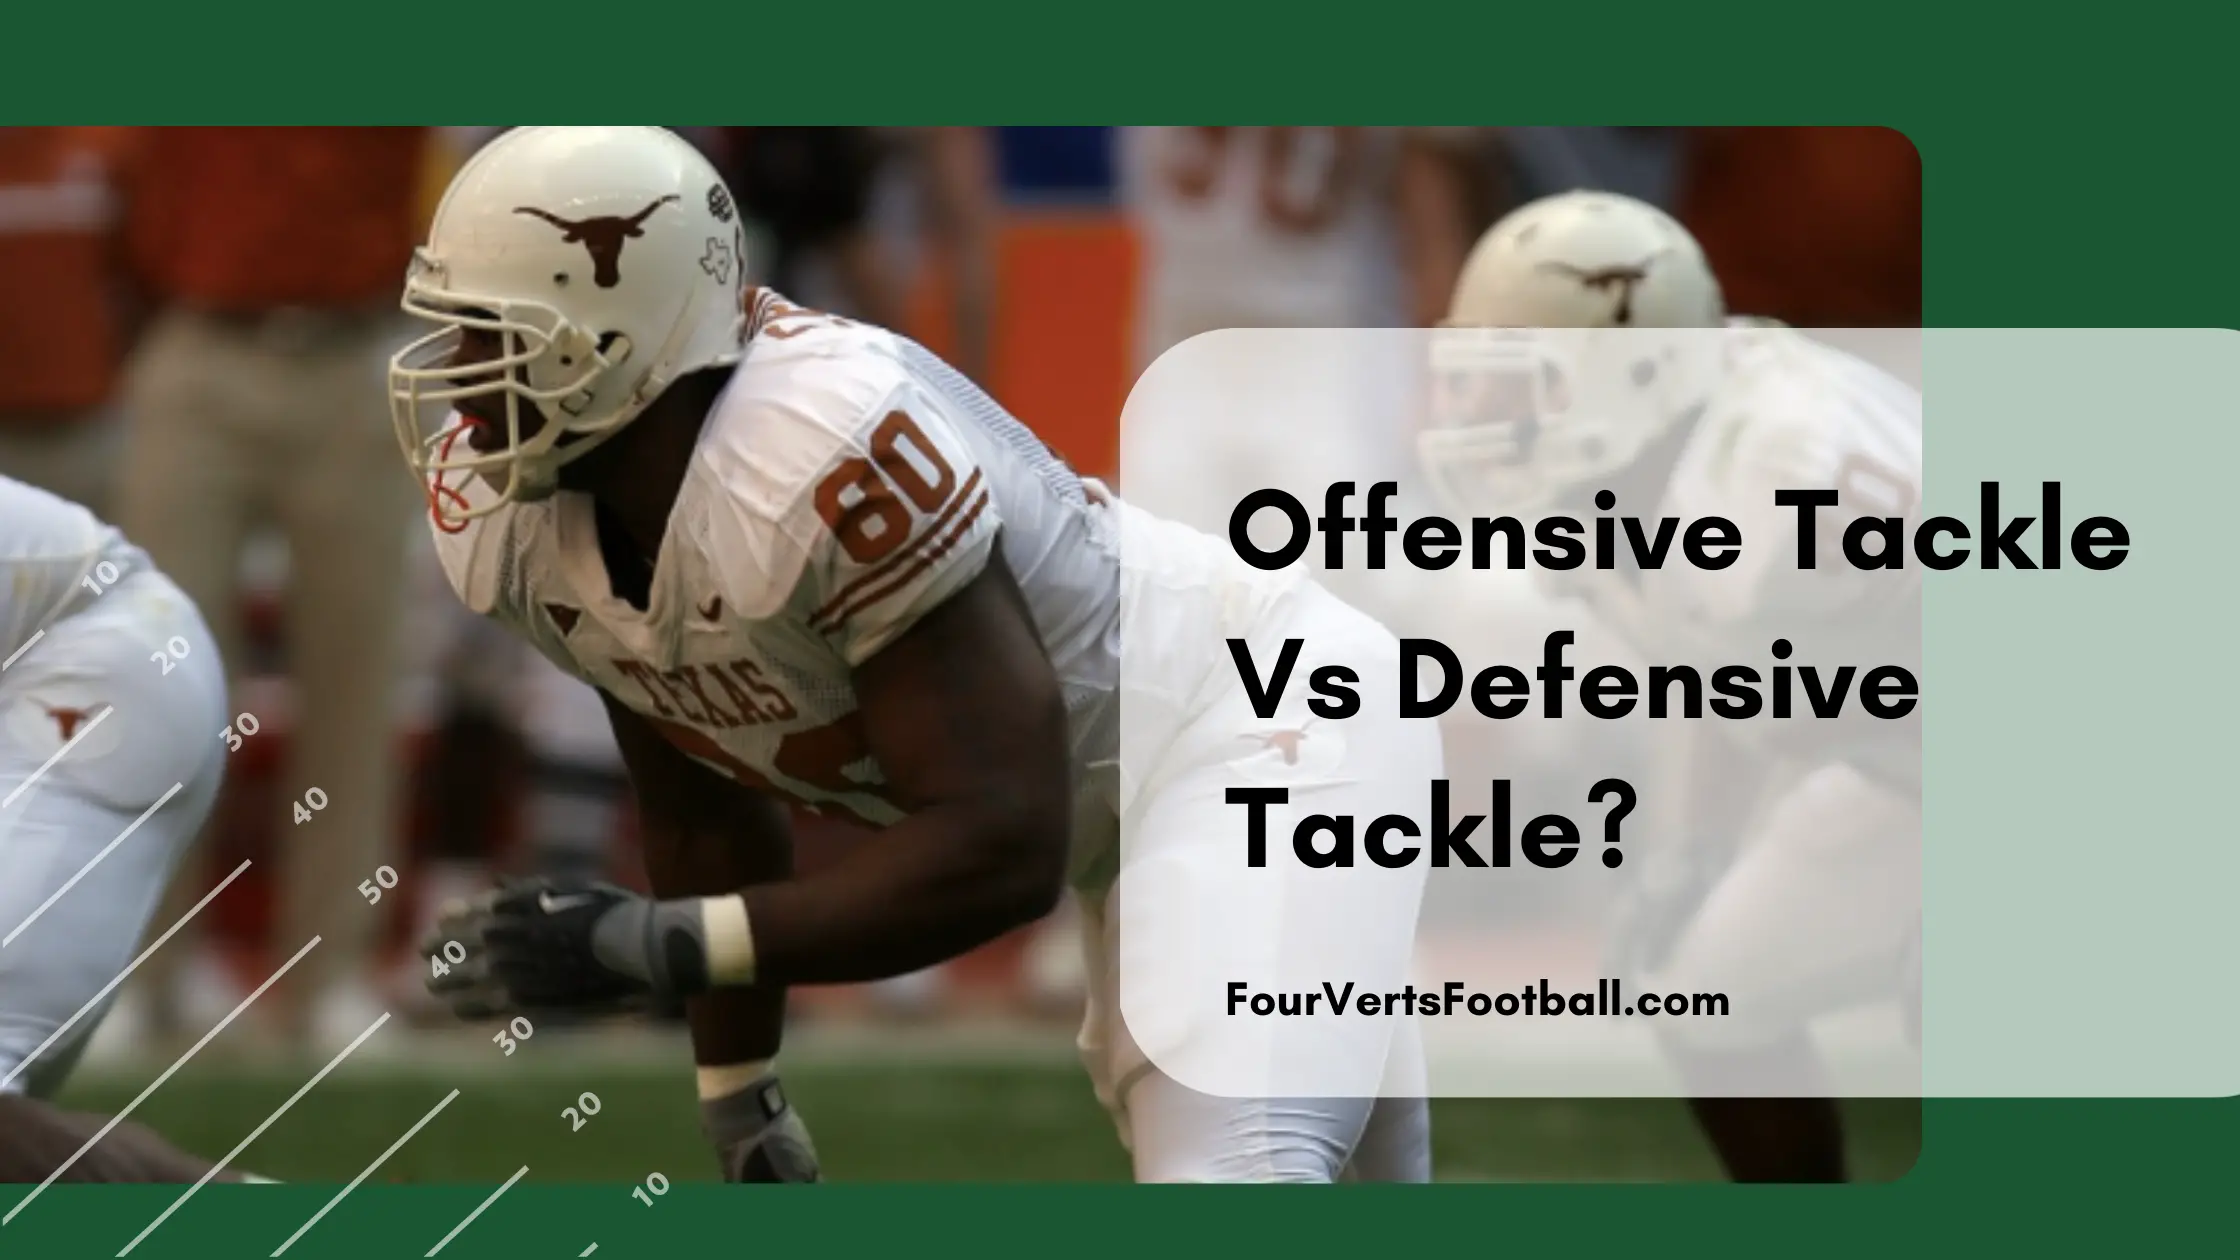 Offensive Tackle Vs Defensive Tackle What Is The Difference?